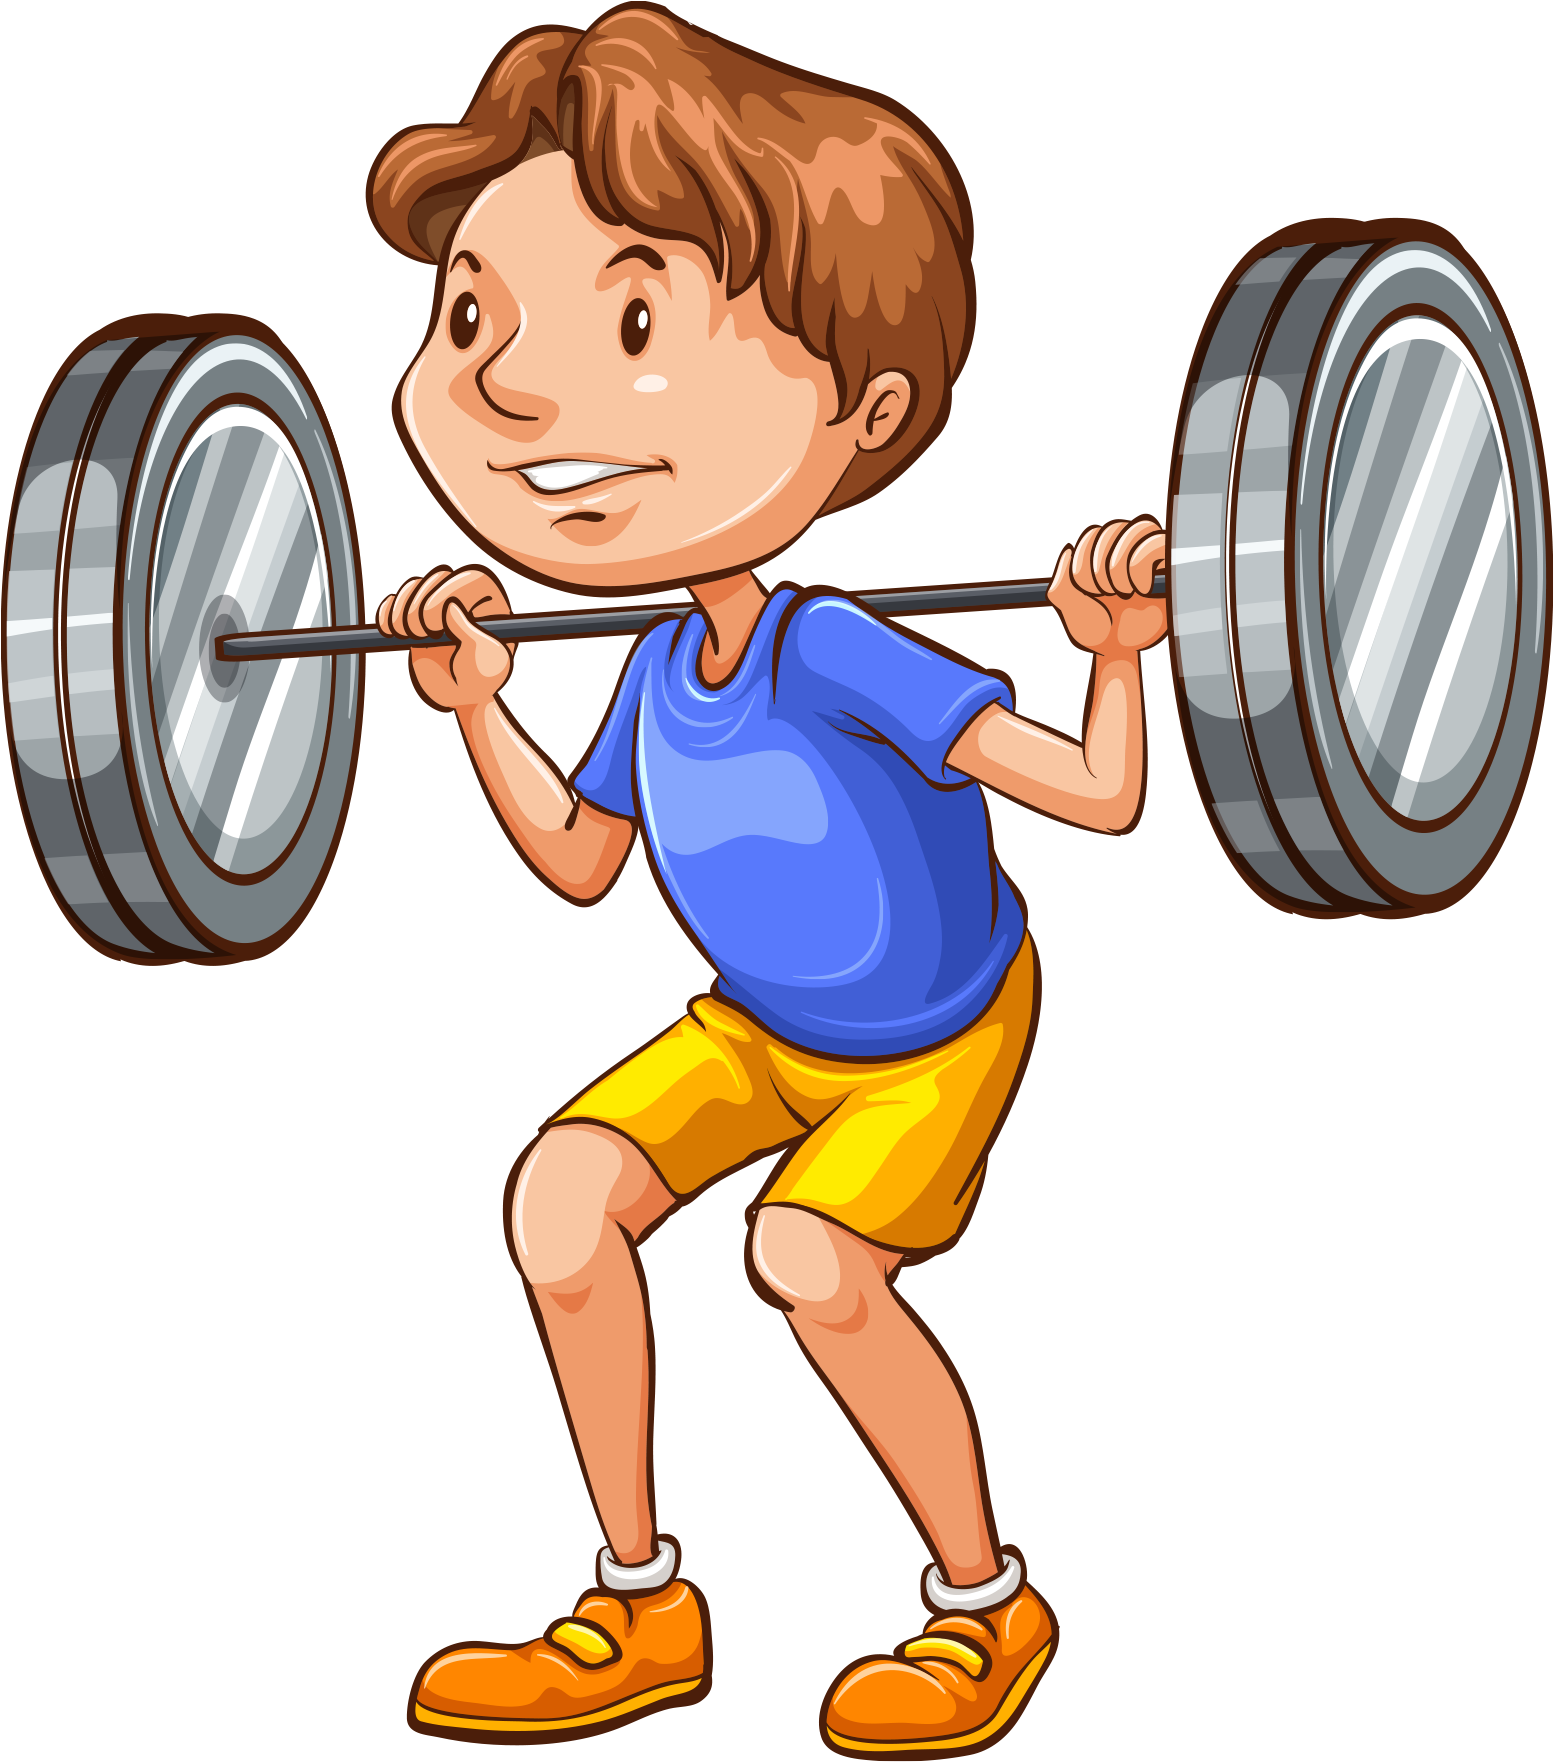 Download - Sports Exercise Cartoon (2048x2048)